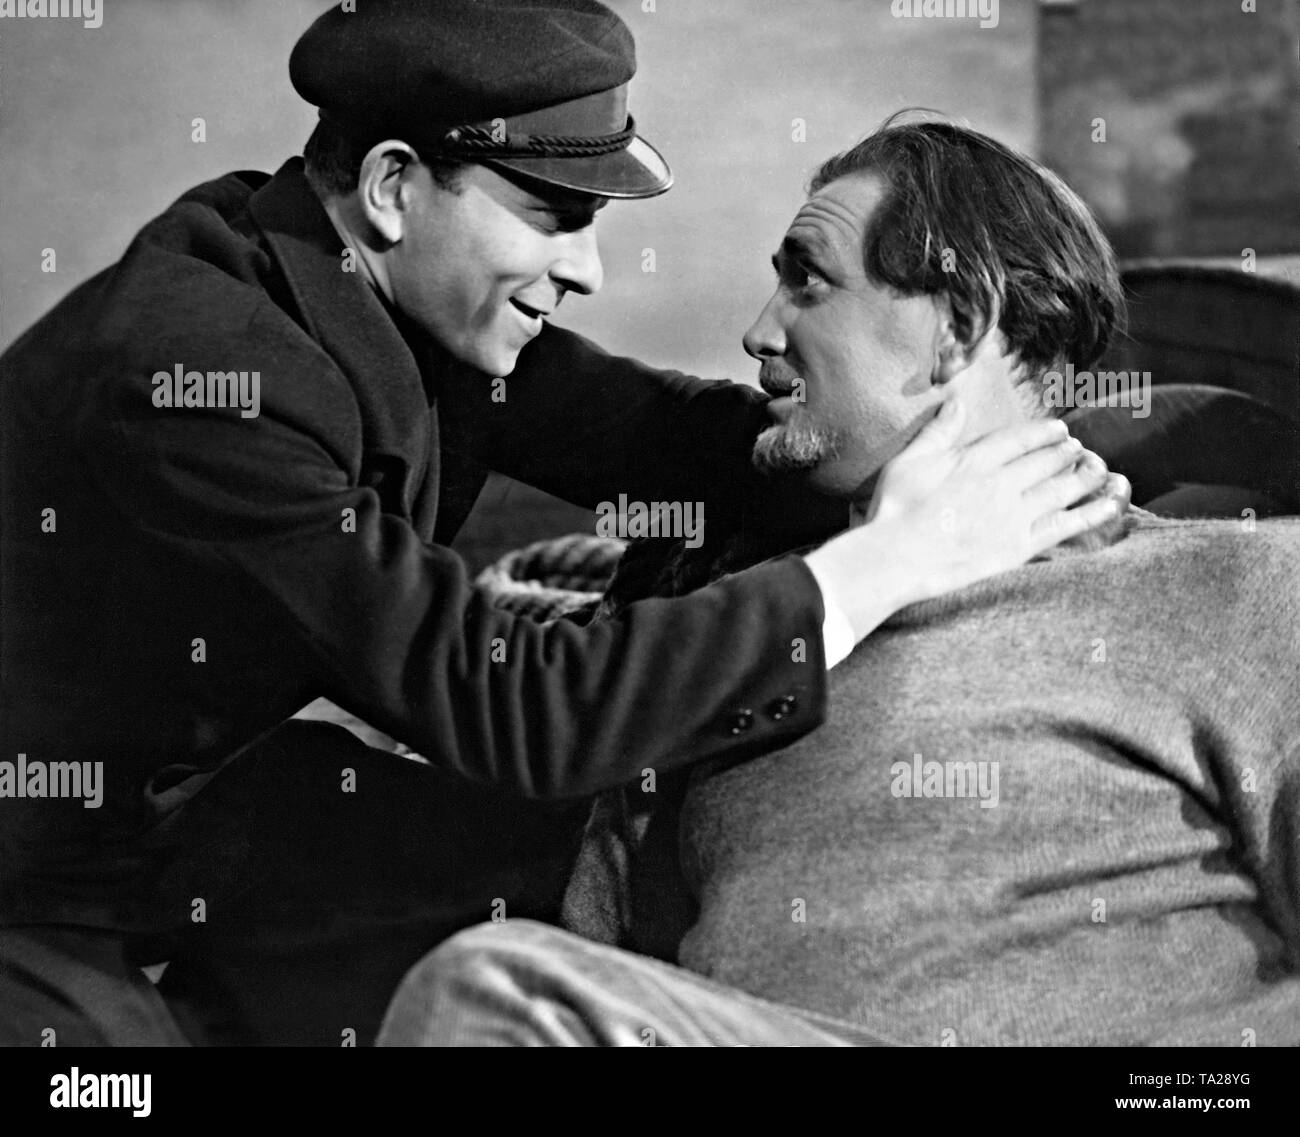 Joachim knuth Black and White Stock Photos & Images - Alamy